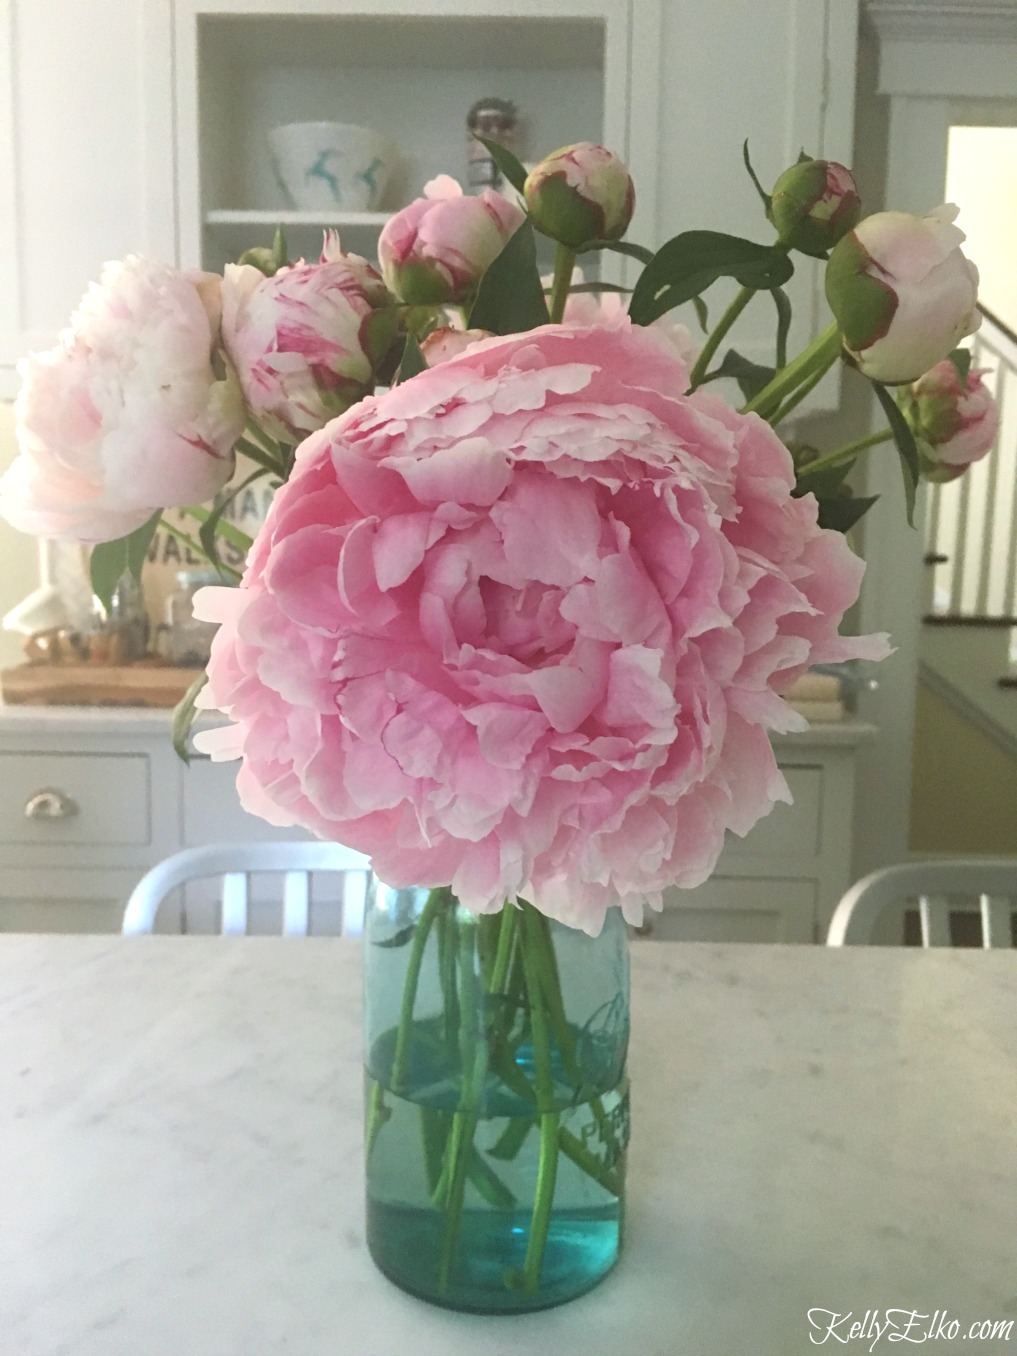 Pink peonies in a mason jar - get tips for planting peonies so they bloom kellyelko.com